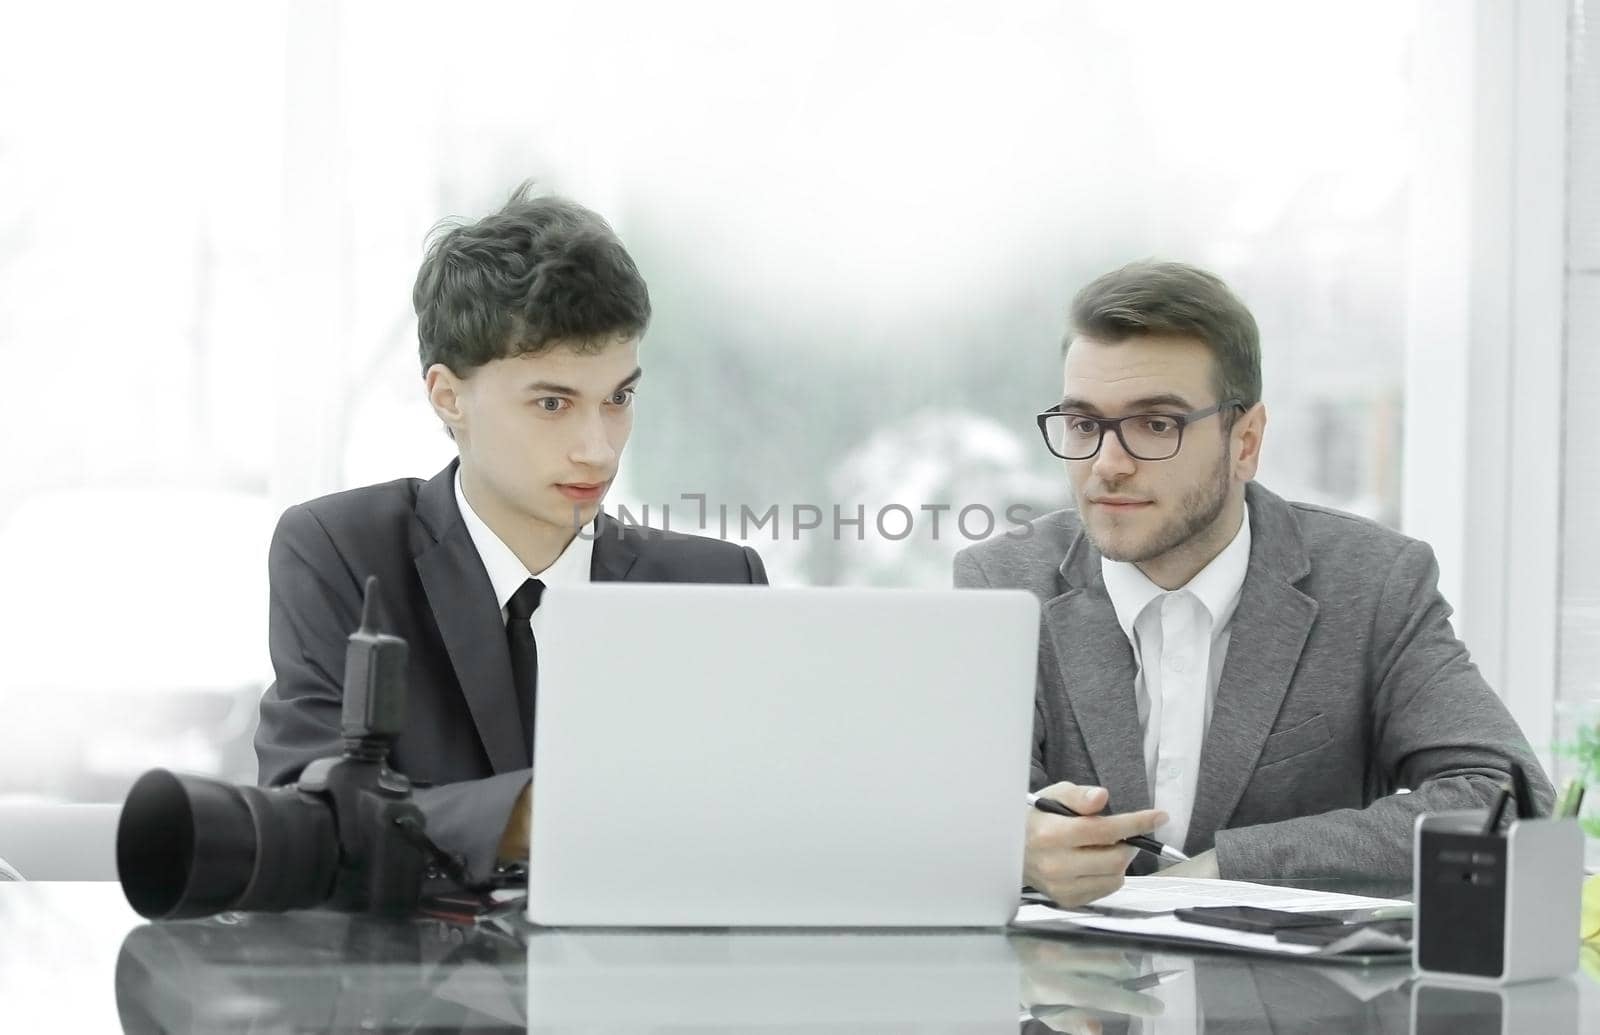 qualified photographers discuss photos to upload files on a laptop . by SmartPhotoLab